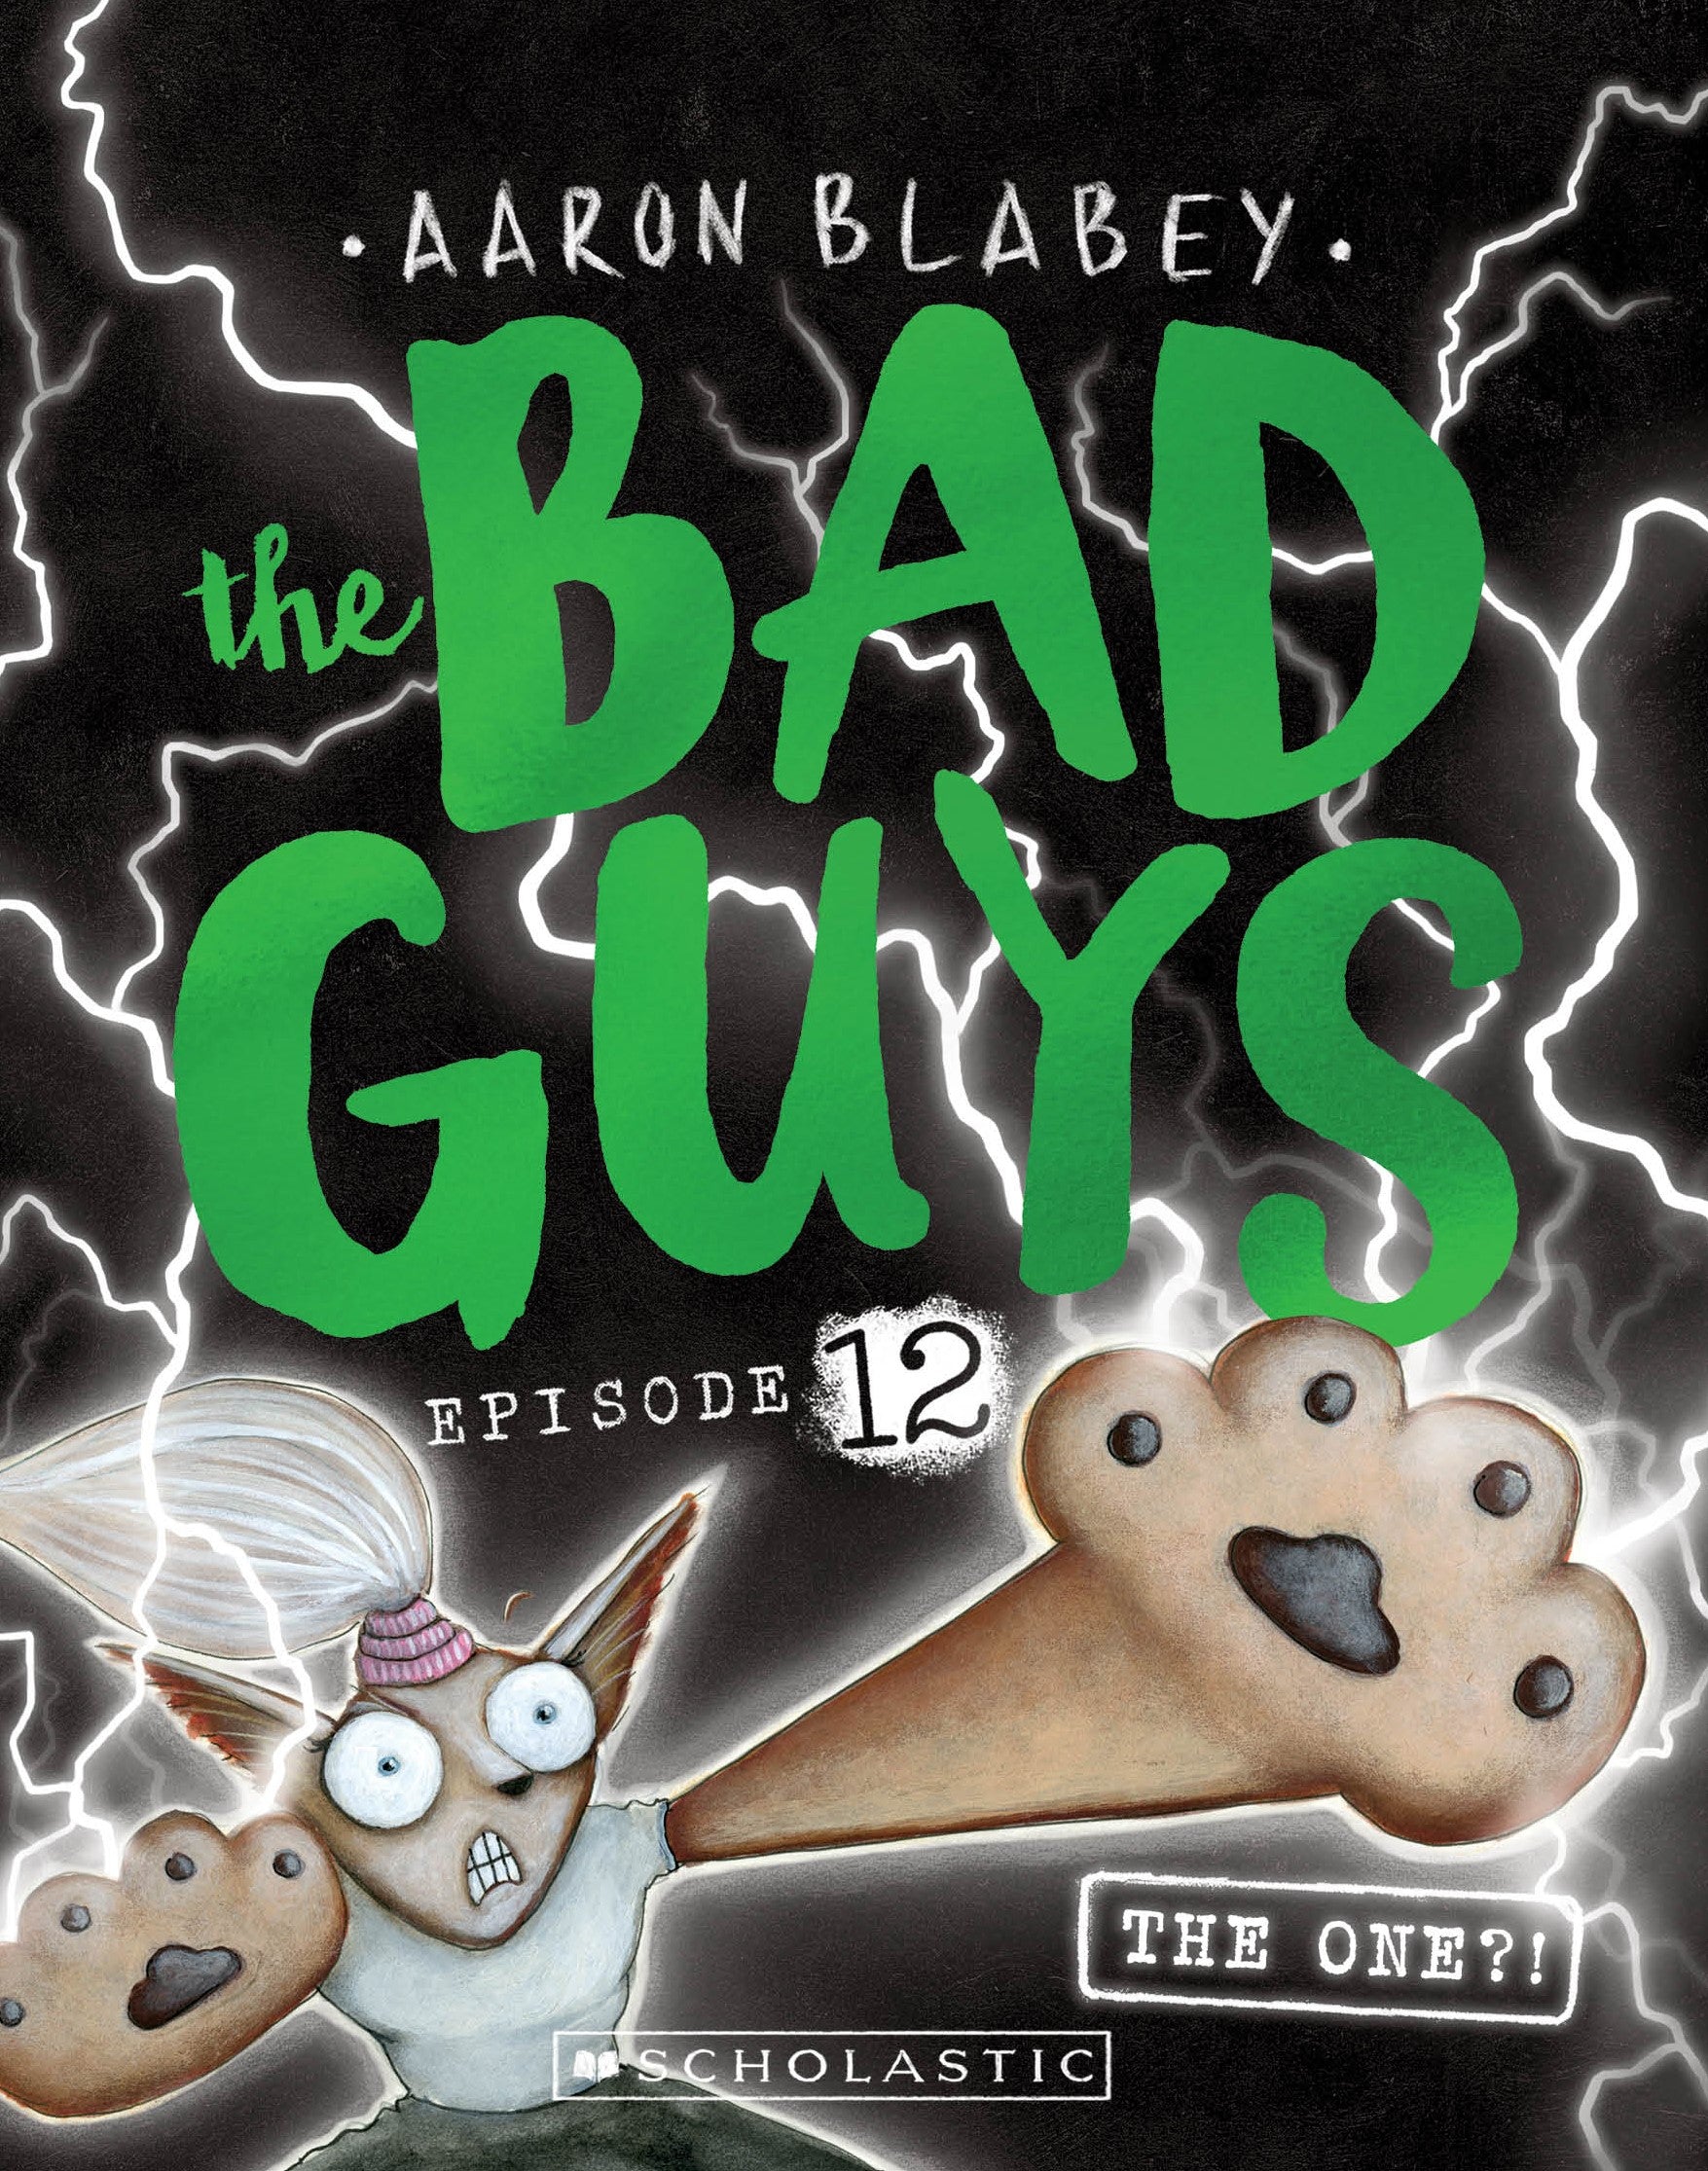 The Bad Guys #12: The One?! by aaron blabey